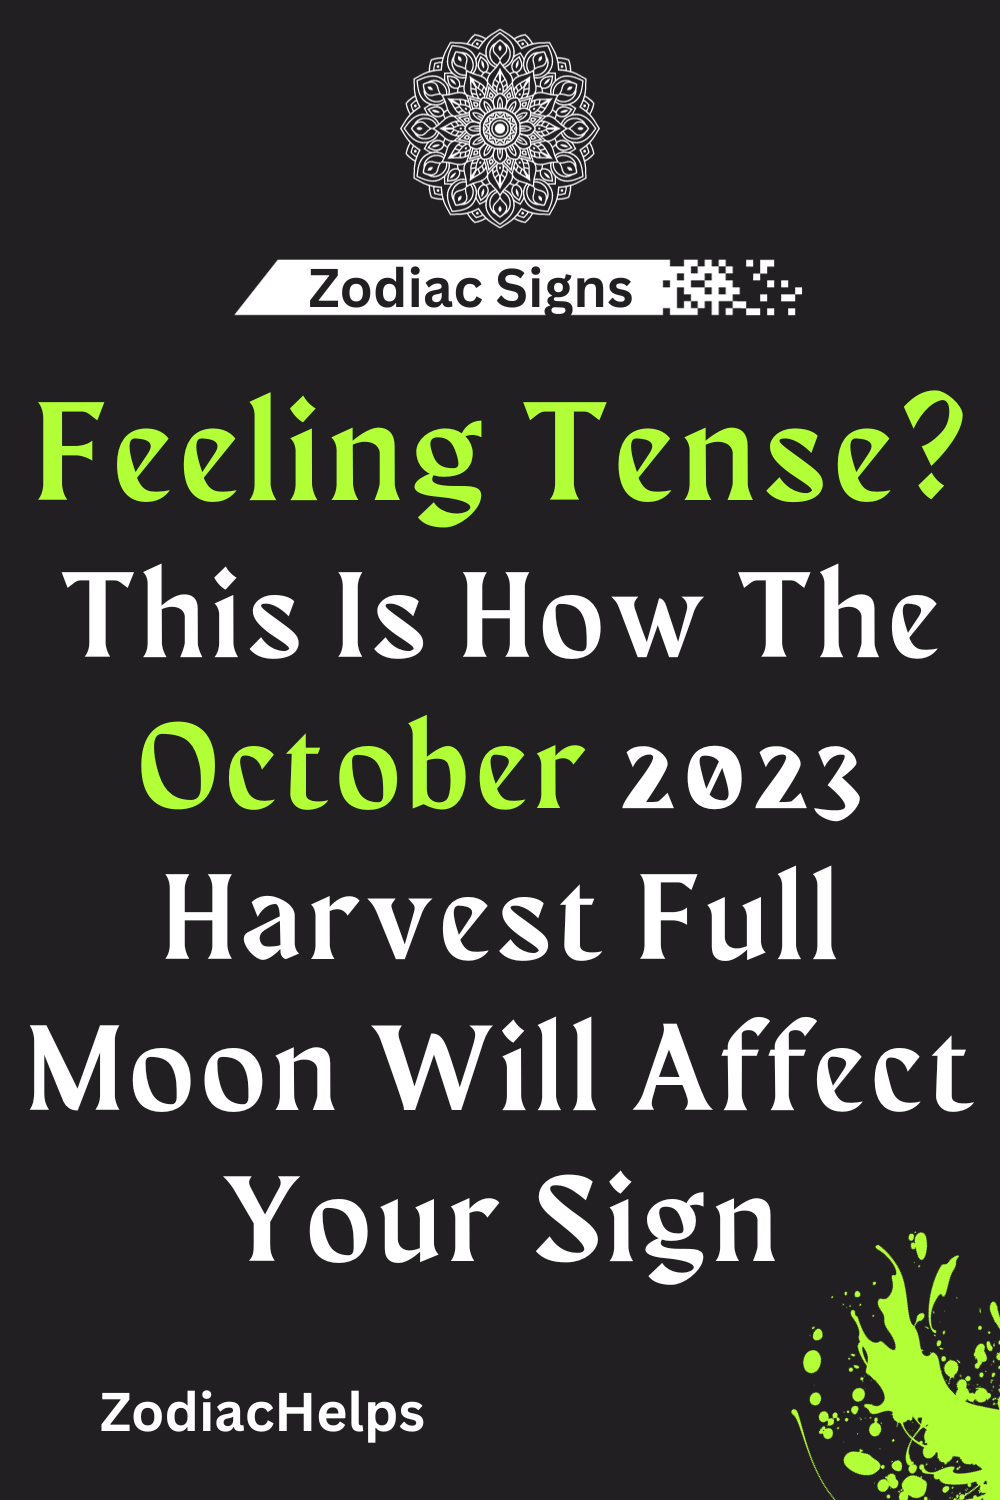 Feeling Tense? This Is How The October 2023 Harvest Full Moon Will Affect Your Sign